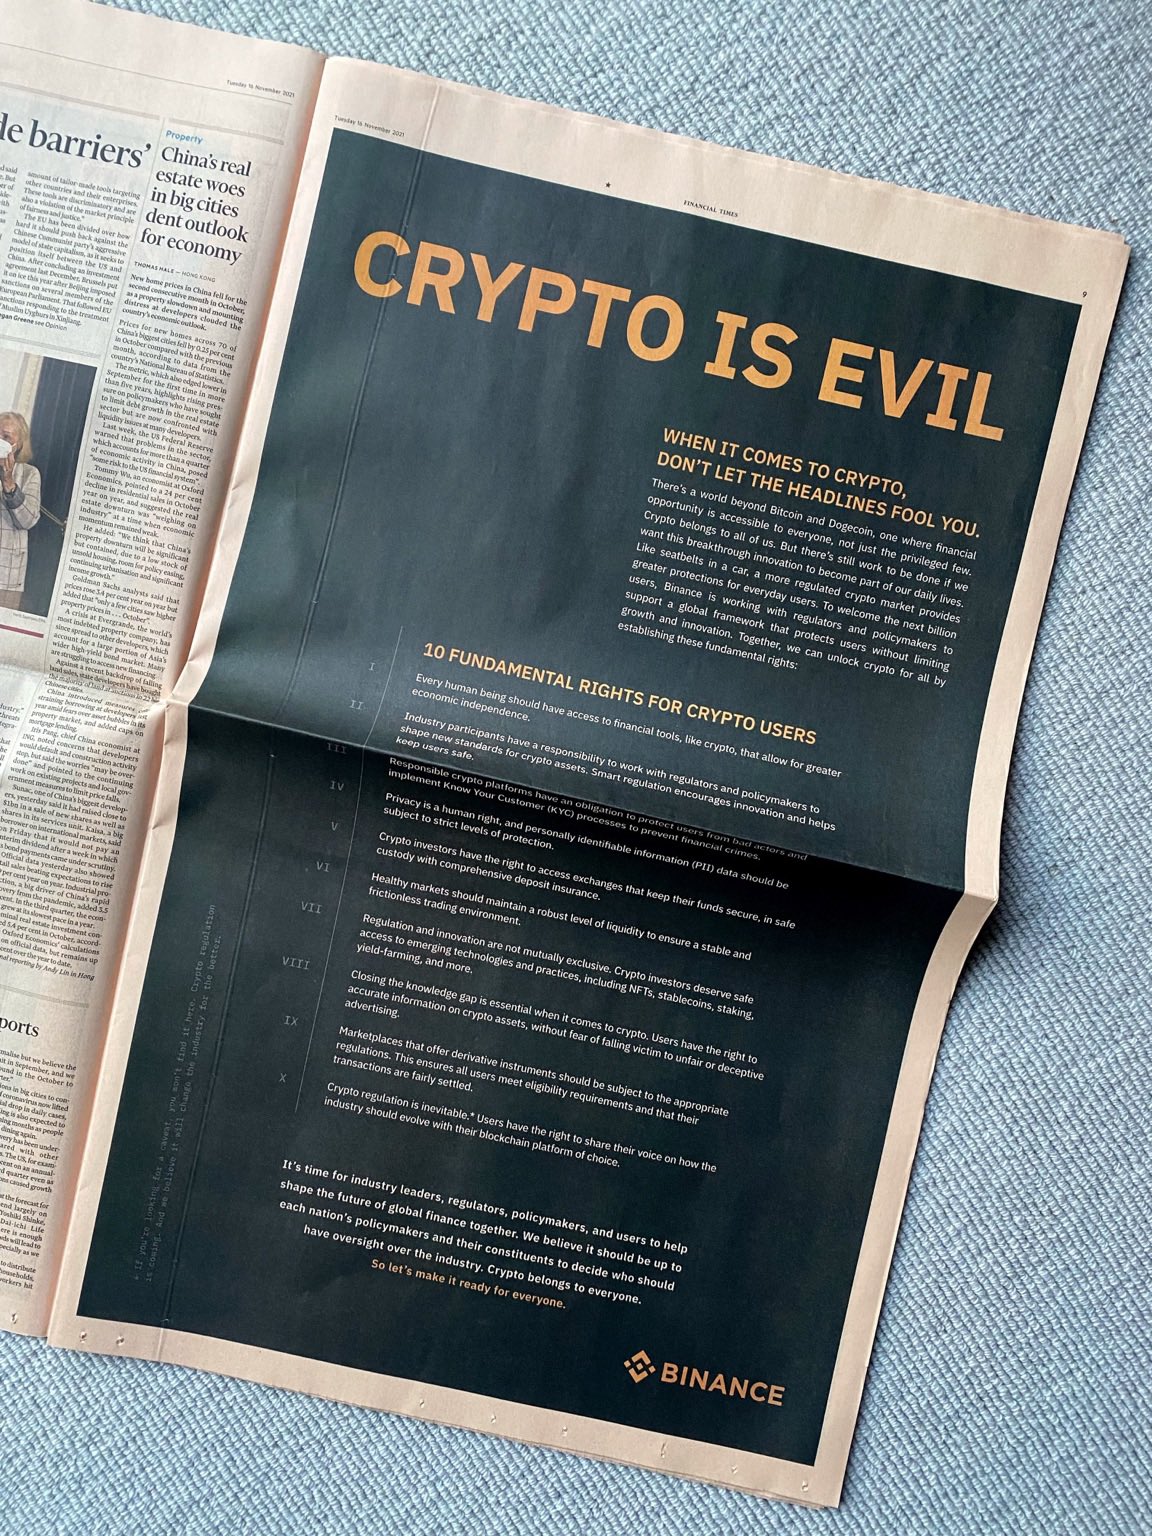 Binance first-ever ad on Financial Times